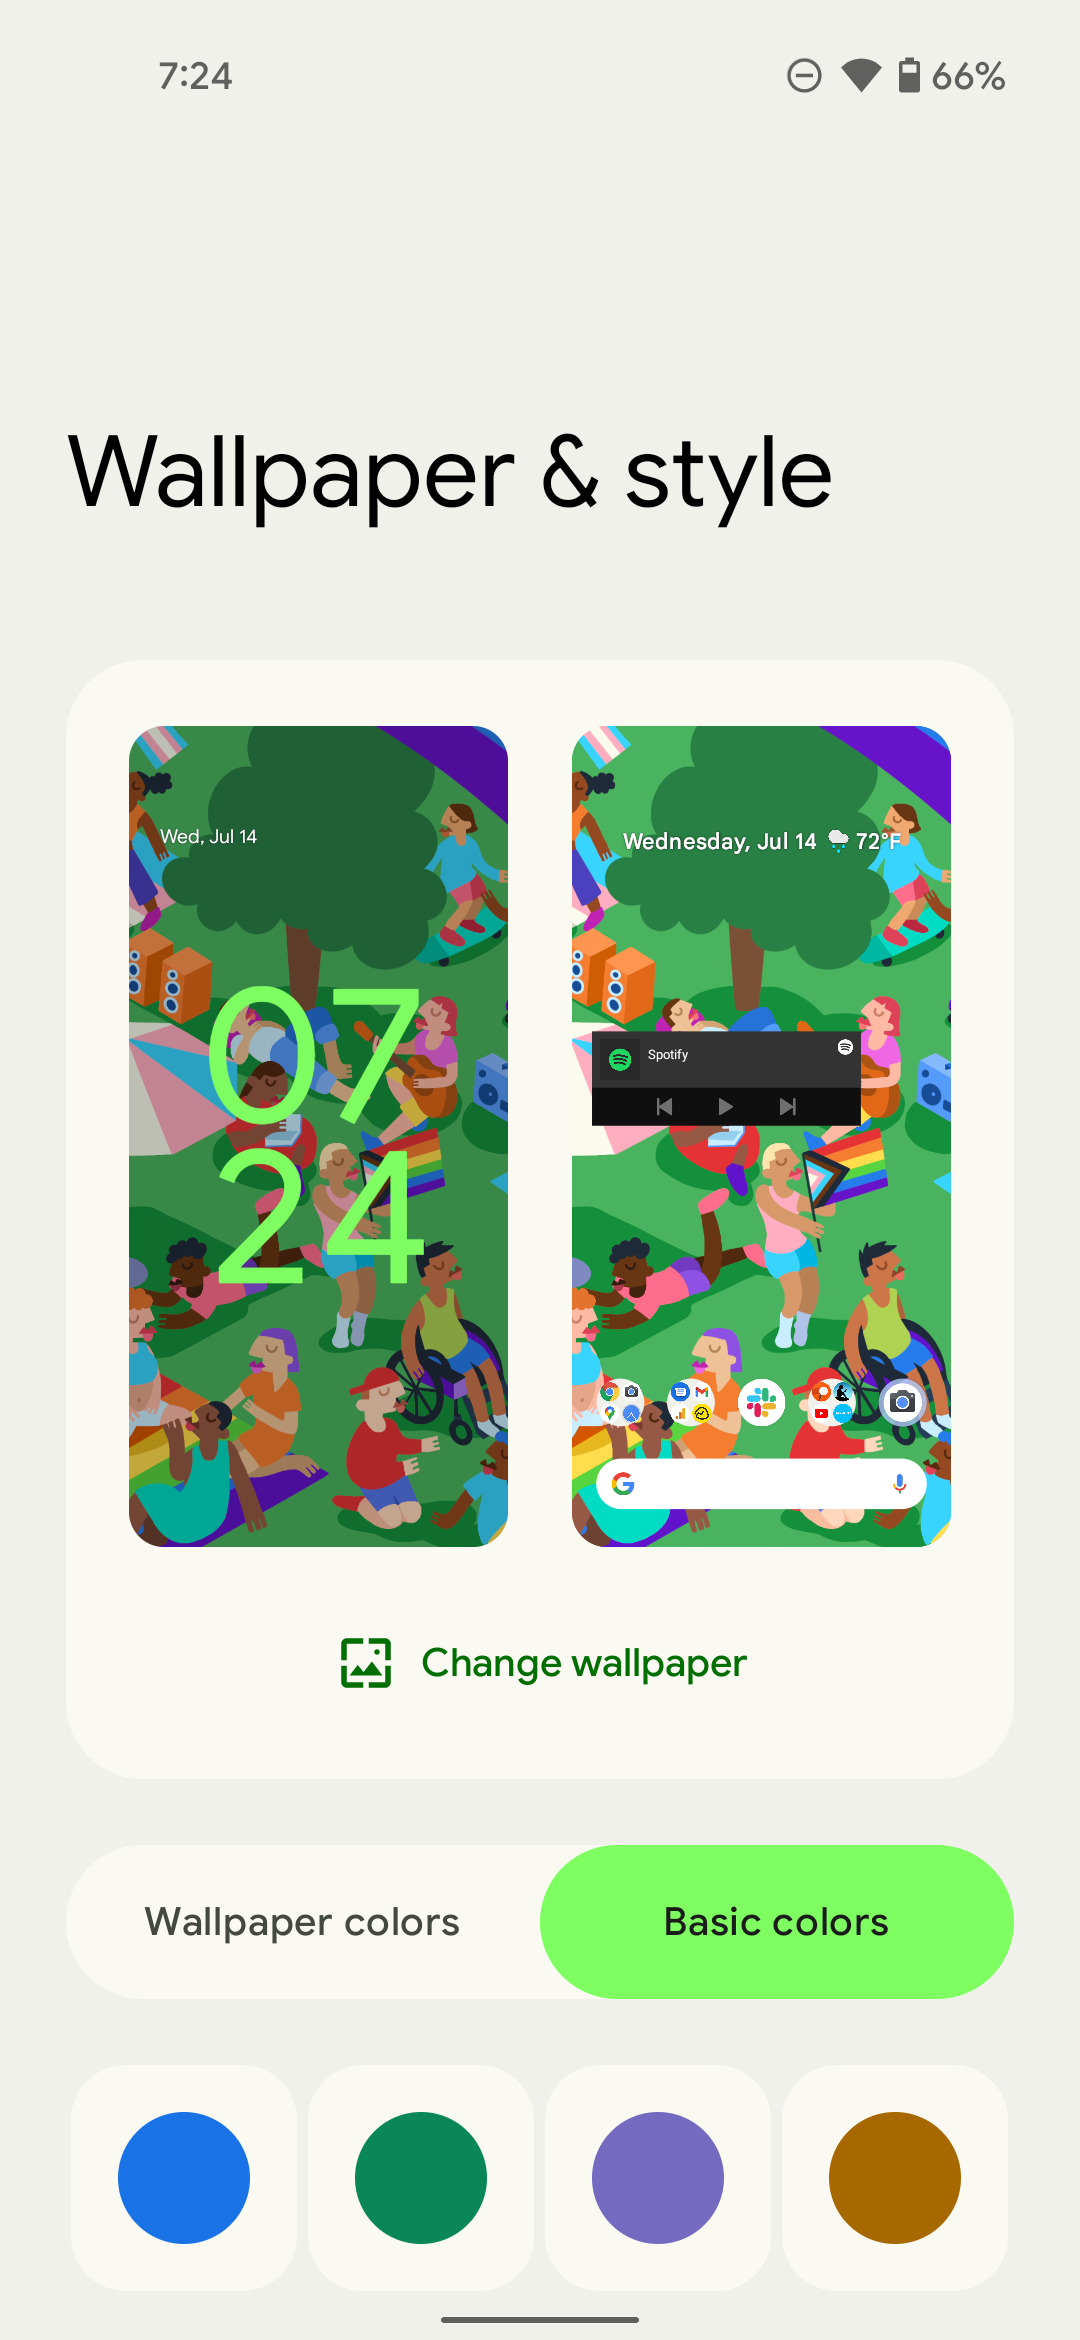 Change wallpapers on a Google Pixel phone